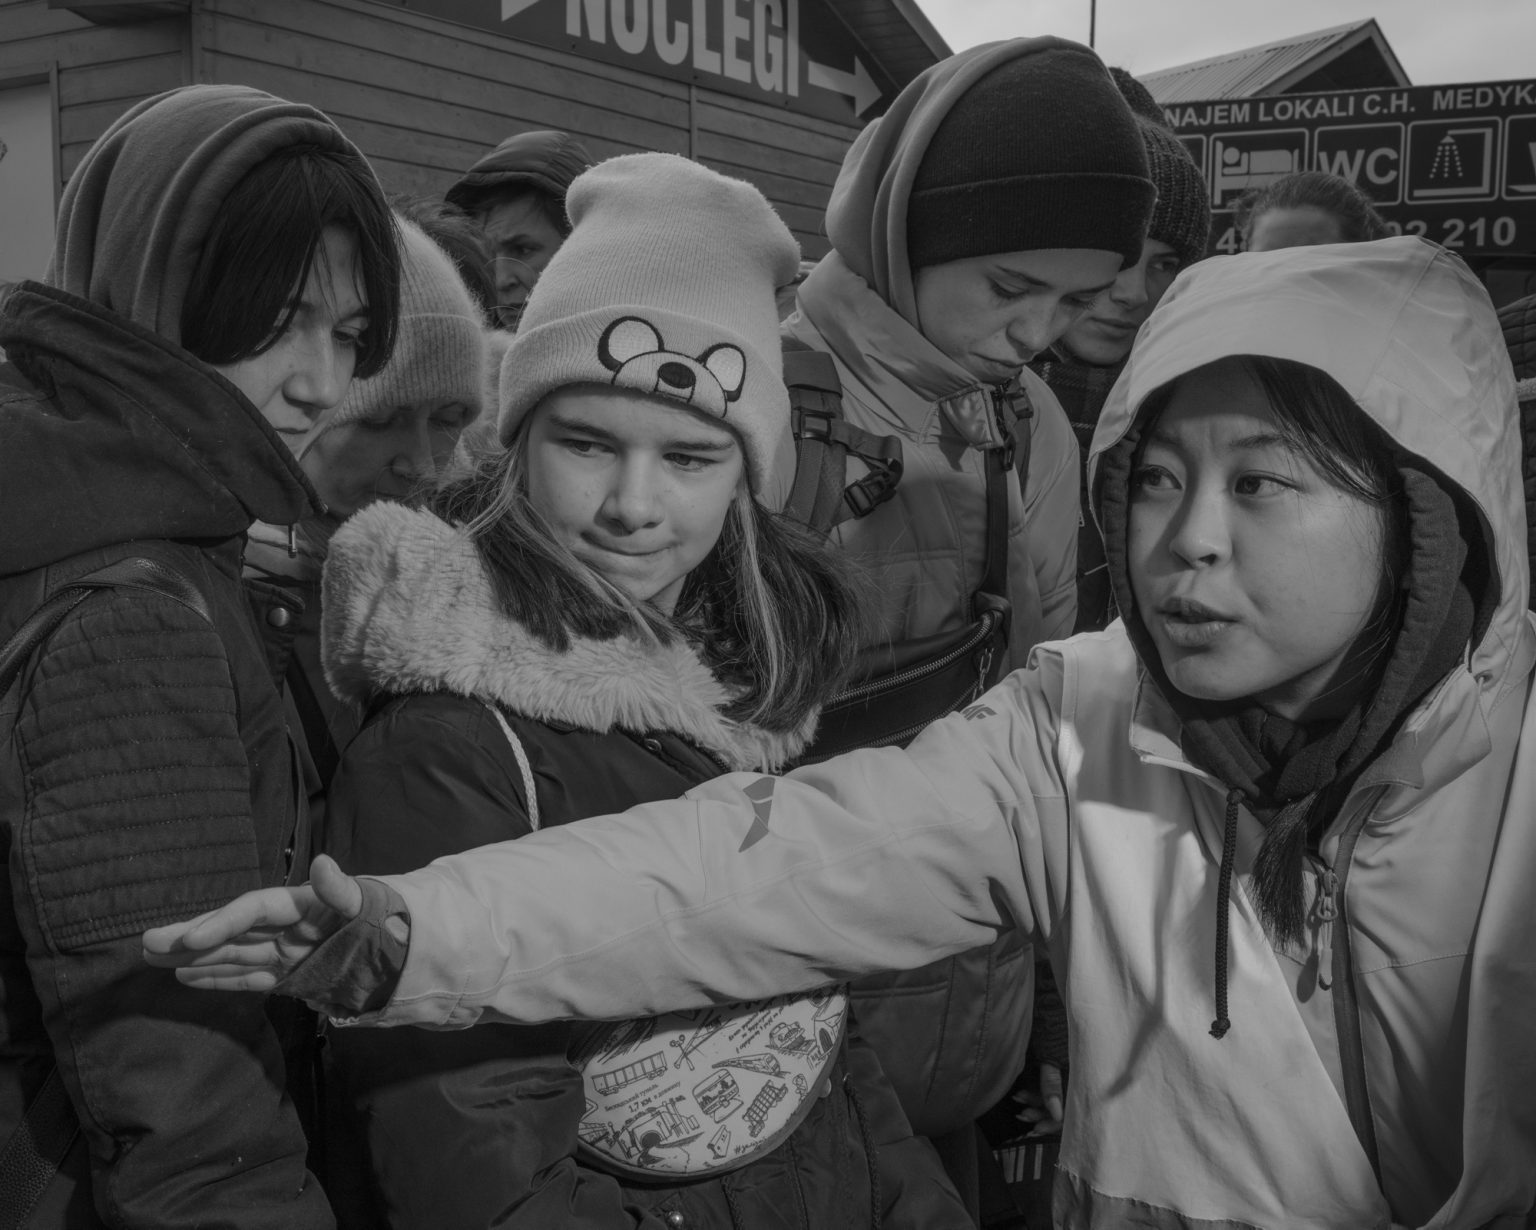 Ukrainian refugees at the Medyka border between Poland and Ukraine. More than 600,000 Ukrainians fleeing the conflict have already crossed this border making Poland the country with the largest number of refugees with one million people welcomed. Medyka, Poland. March 2022.                                              As Russia invades Ukraine, thousands of Ukrainians are fleeing the country to find shelter in bordering countries. 
---------
Con l'invasione russa ai danni dell'Ucraina, migliaia di ucraini sono in fuga dalla nazione d'origine per cercare rifugio nelle nazioni confinanti.